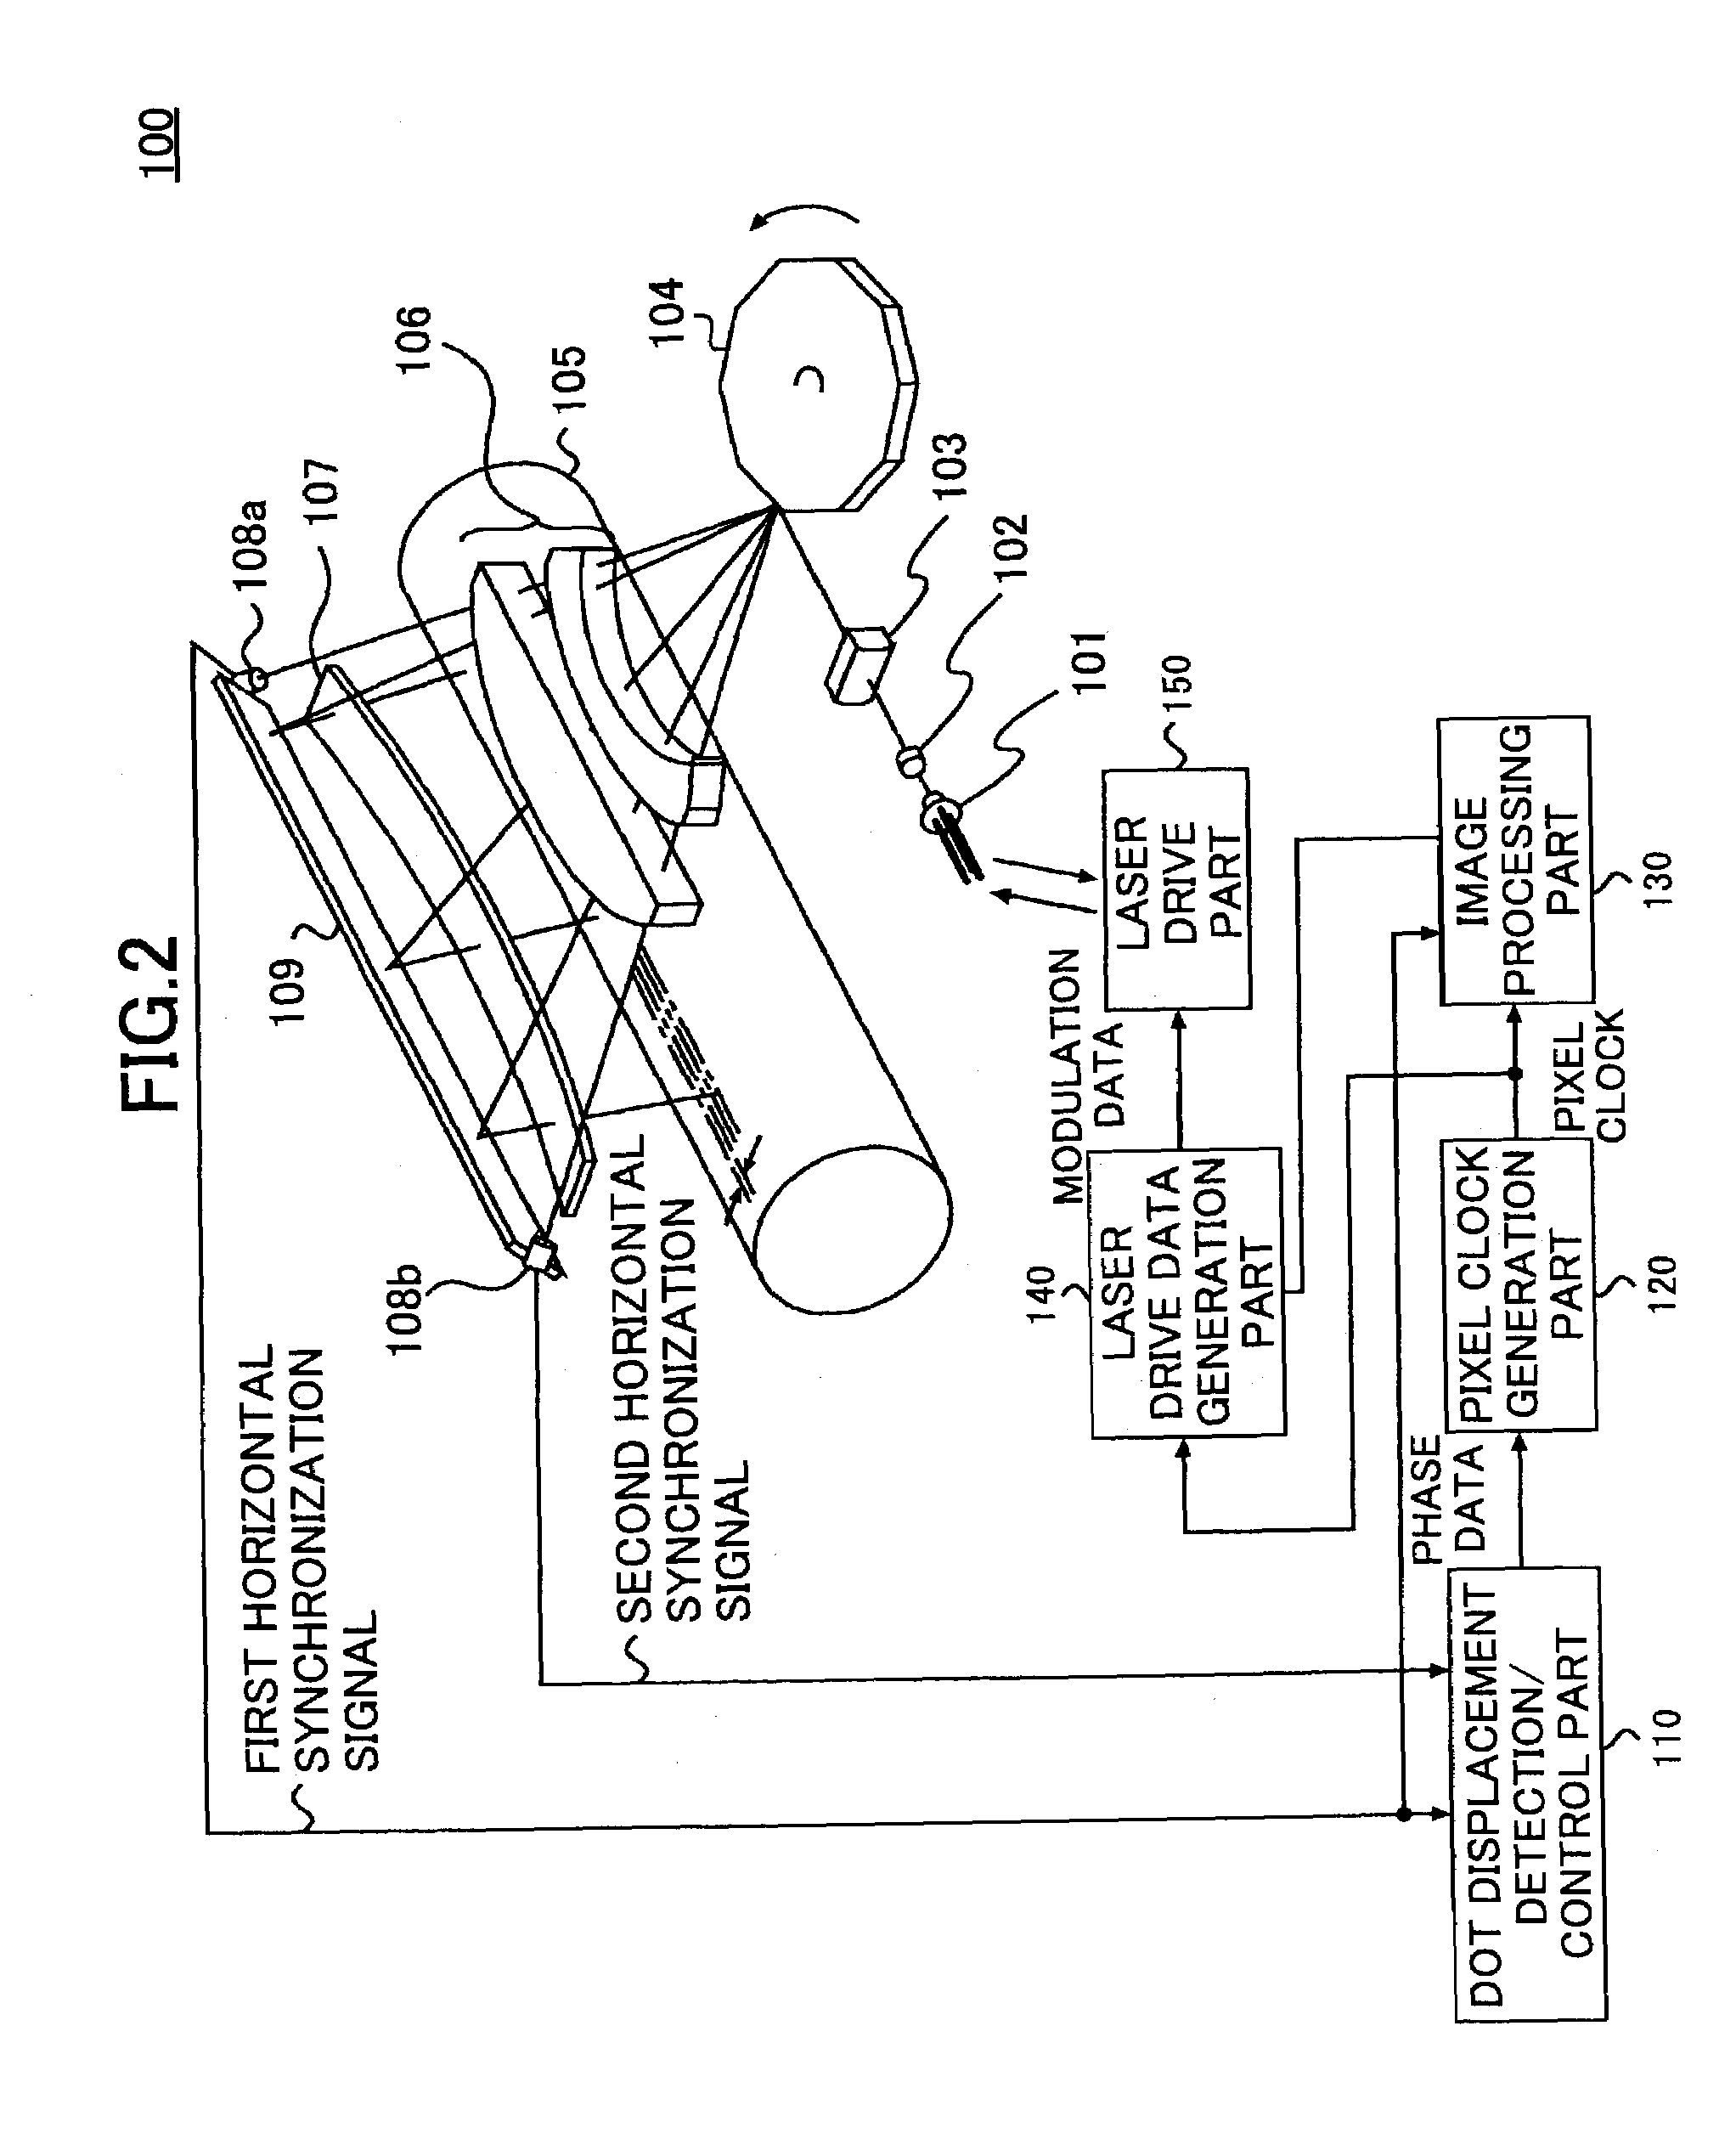 Pixel clock generation device causing state transition of pixel clock according to detected state transition and phase data indicating phase shift amount